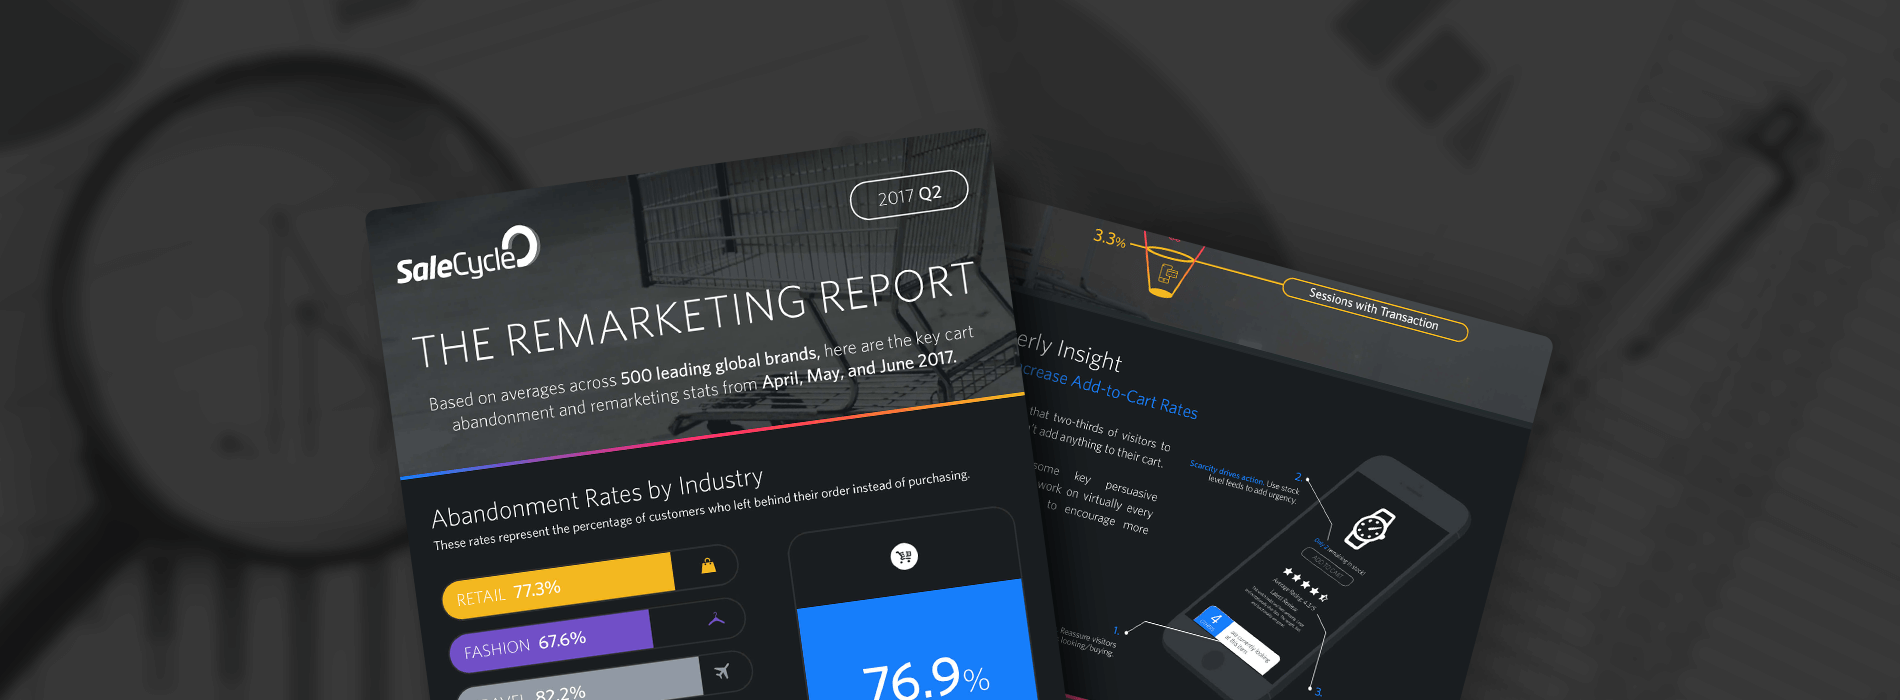 [Infographic] The Remarketing Report – Q2 2017